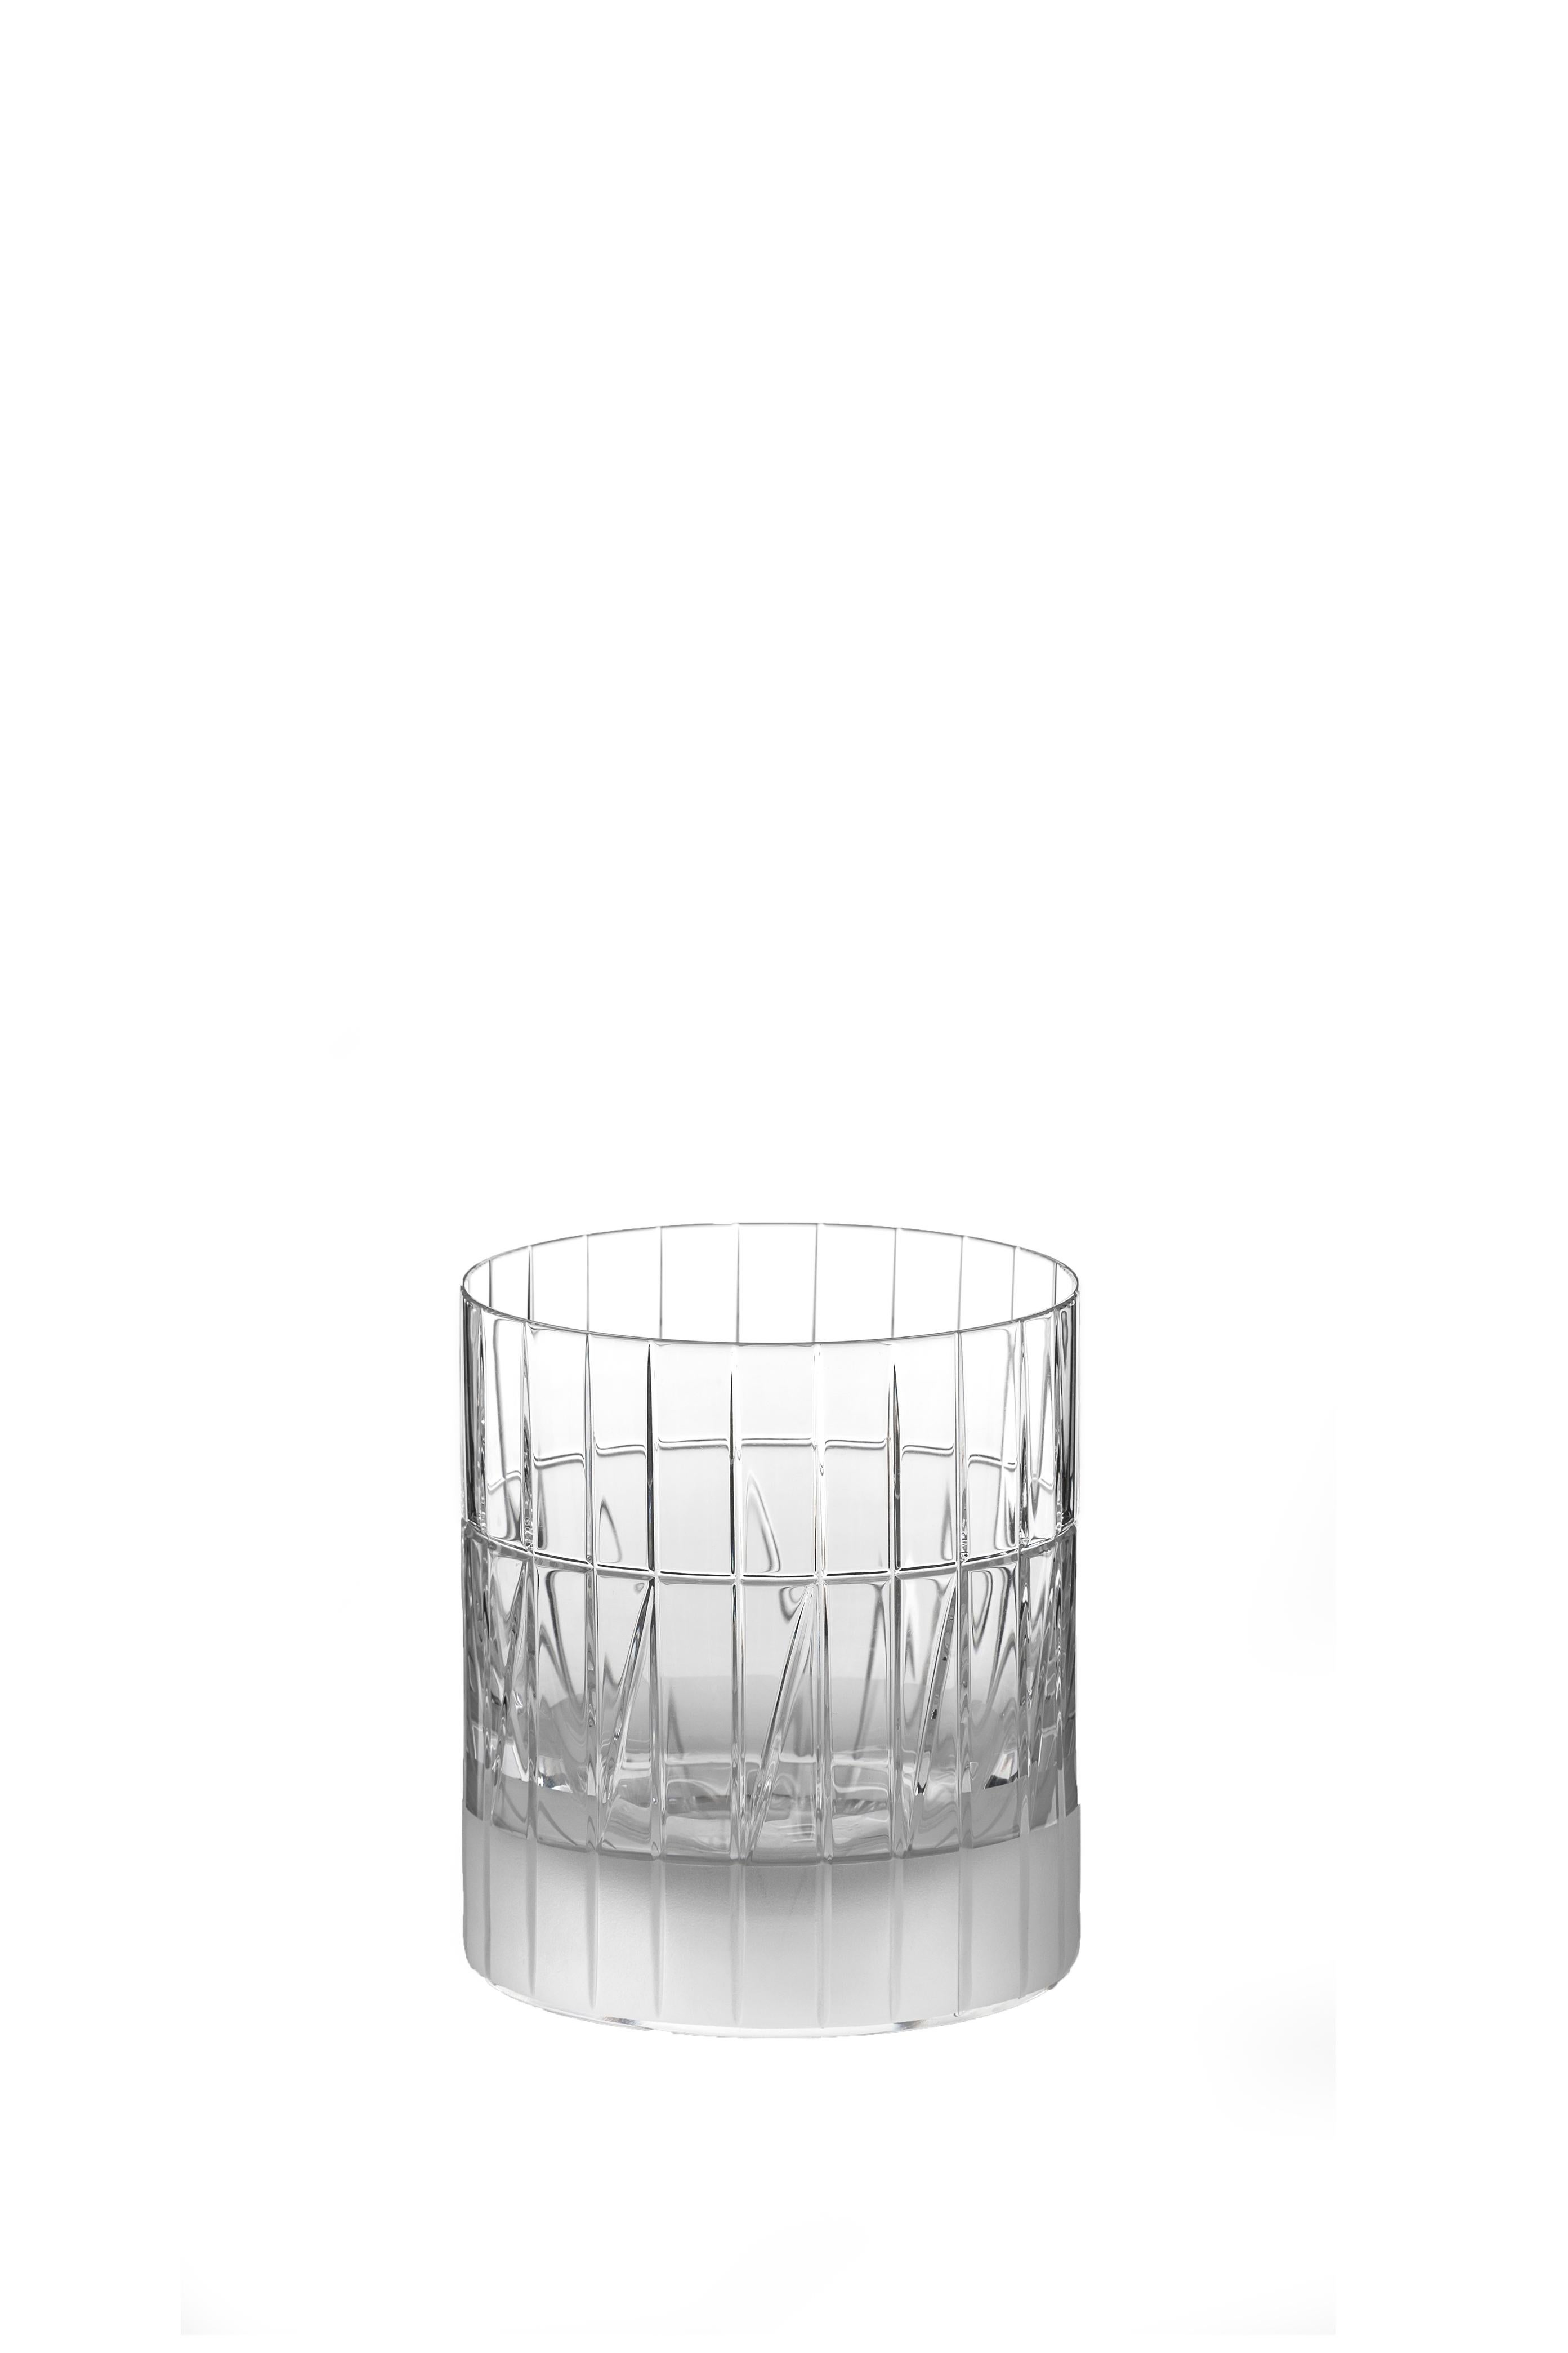 Contemporary Scholten & Baijings Handmade Irish Crystal Whiskey Glass 'Elements' Series For Sale